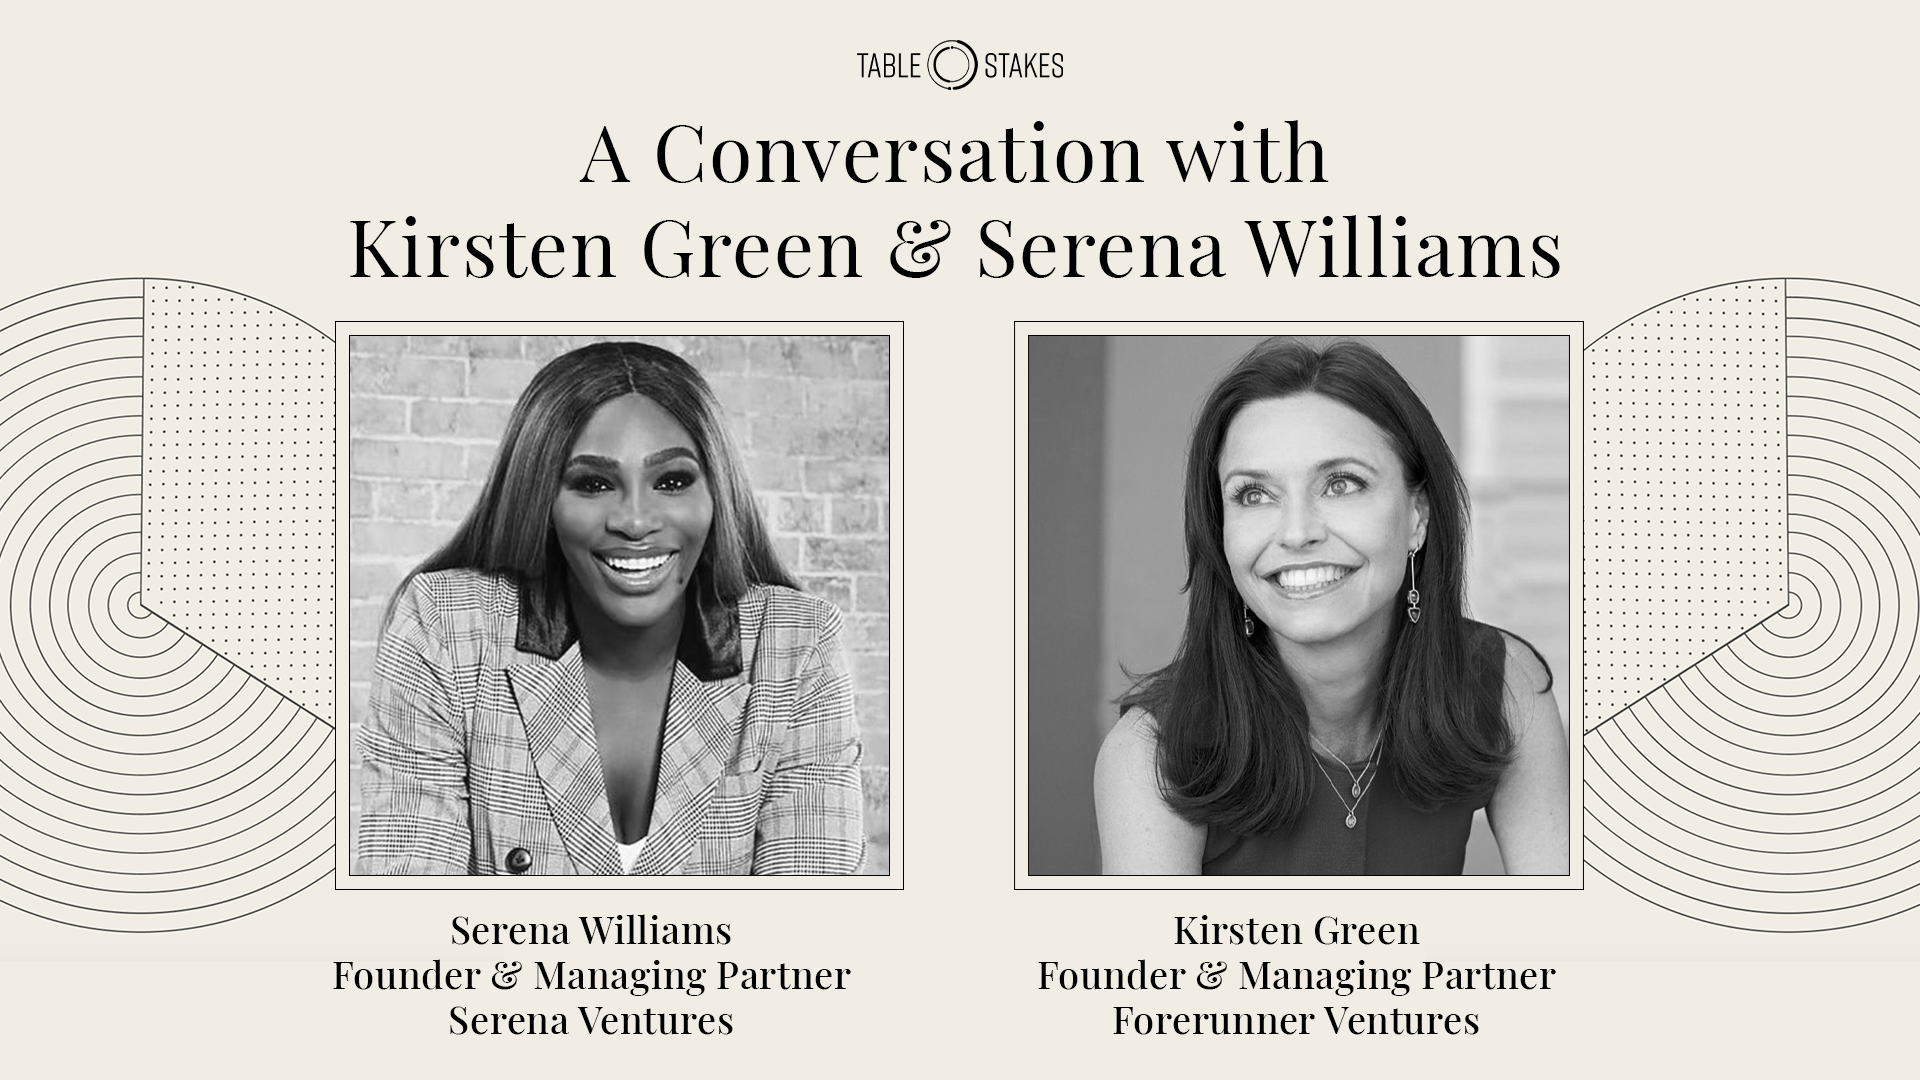 A conversation with Kirsten Green and Serena Williams | Table Stakes 2020